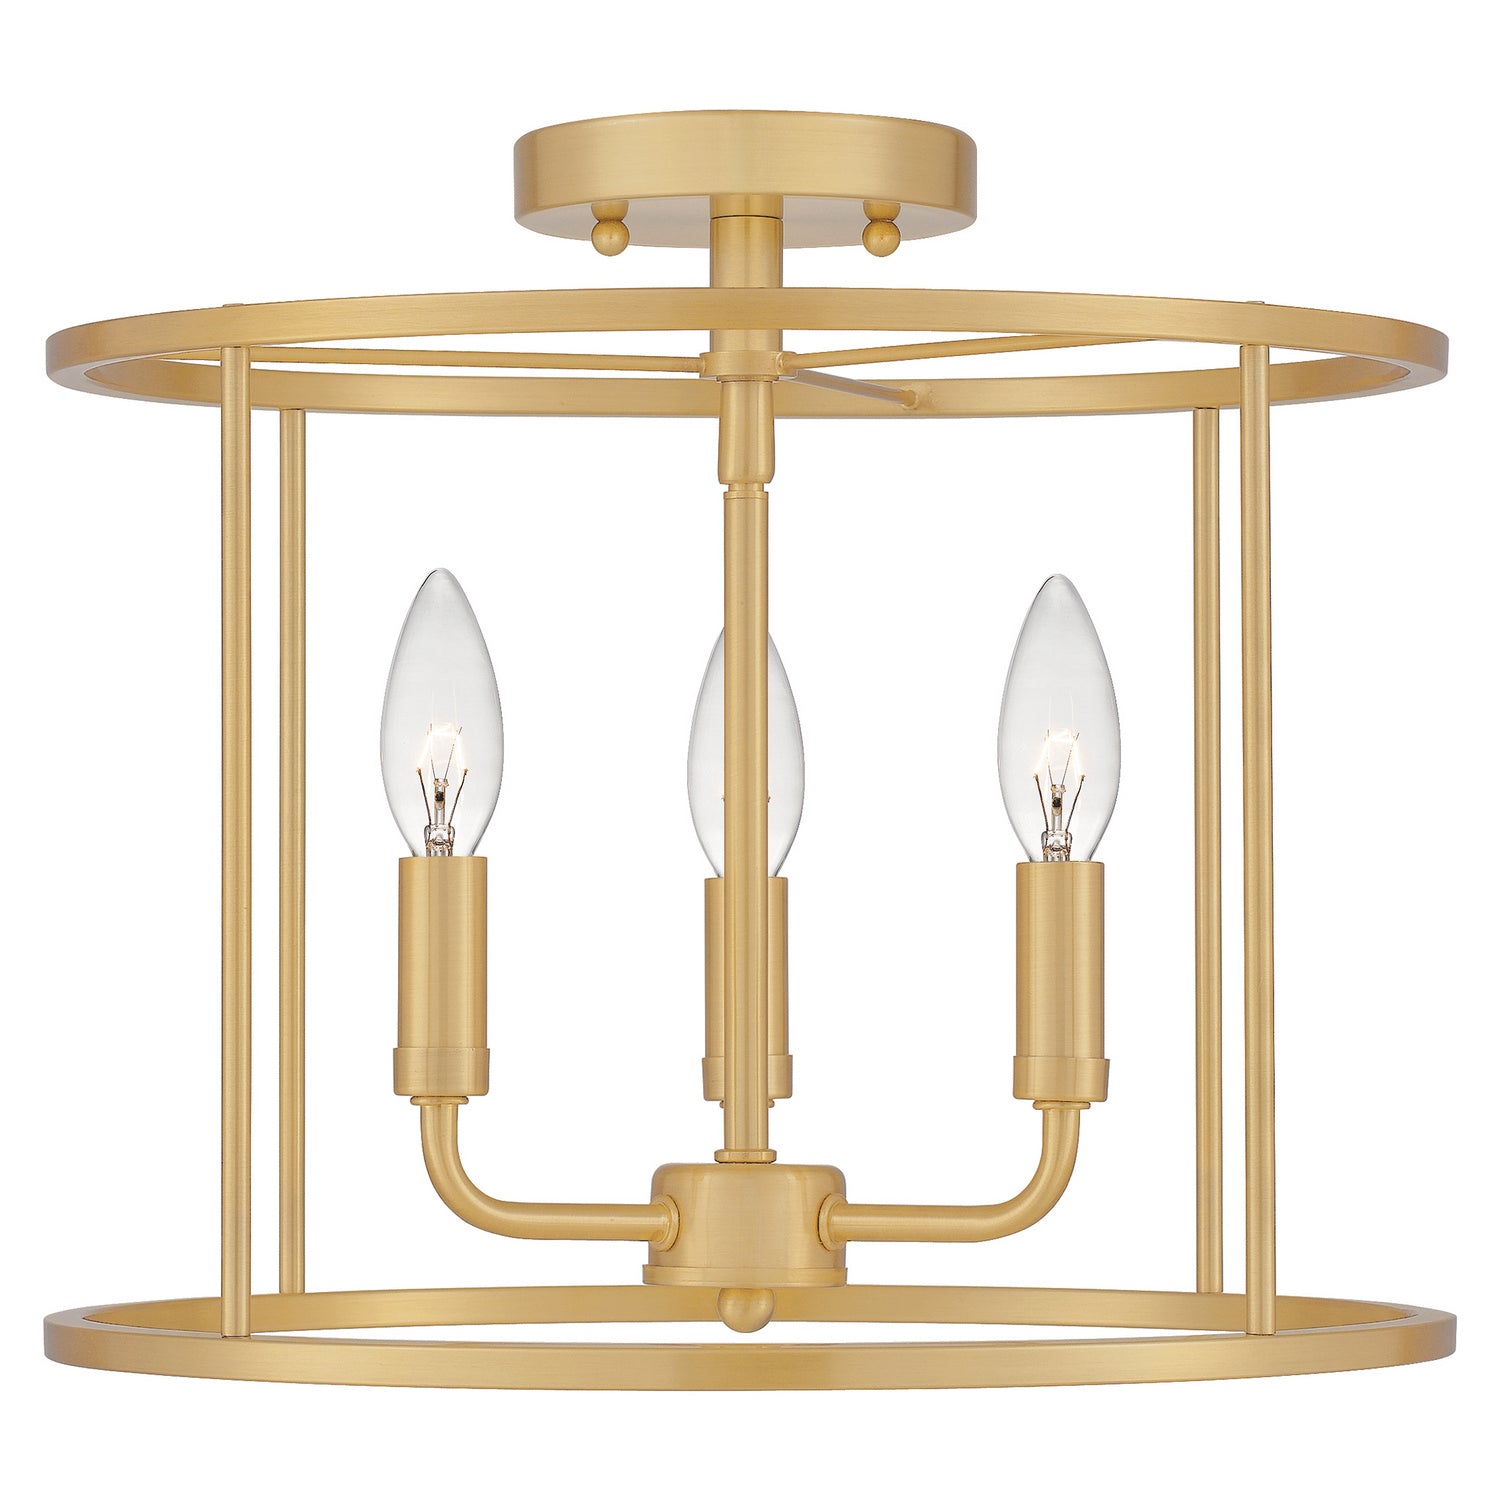 Abner Three Light Semi Flush Mount by Quoizel in Aged Brass Finish (ABR1714AB)